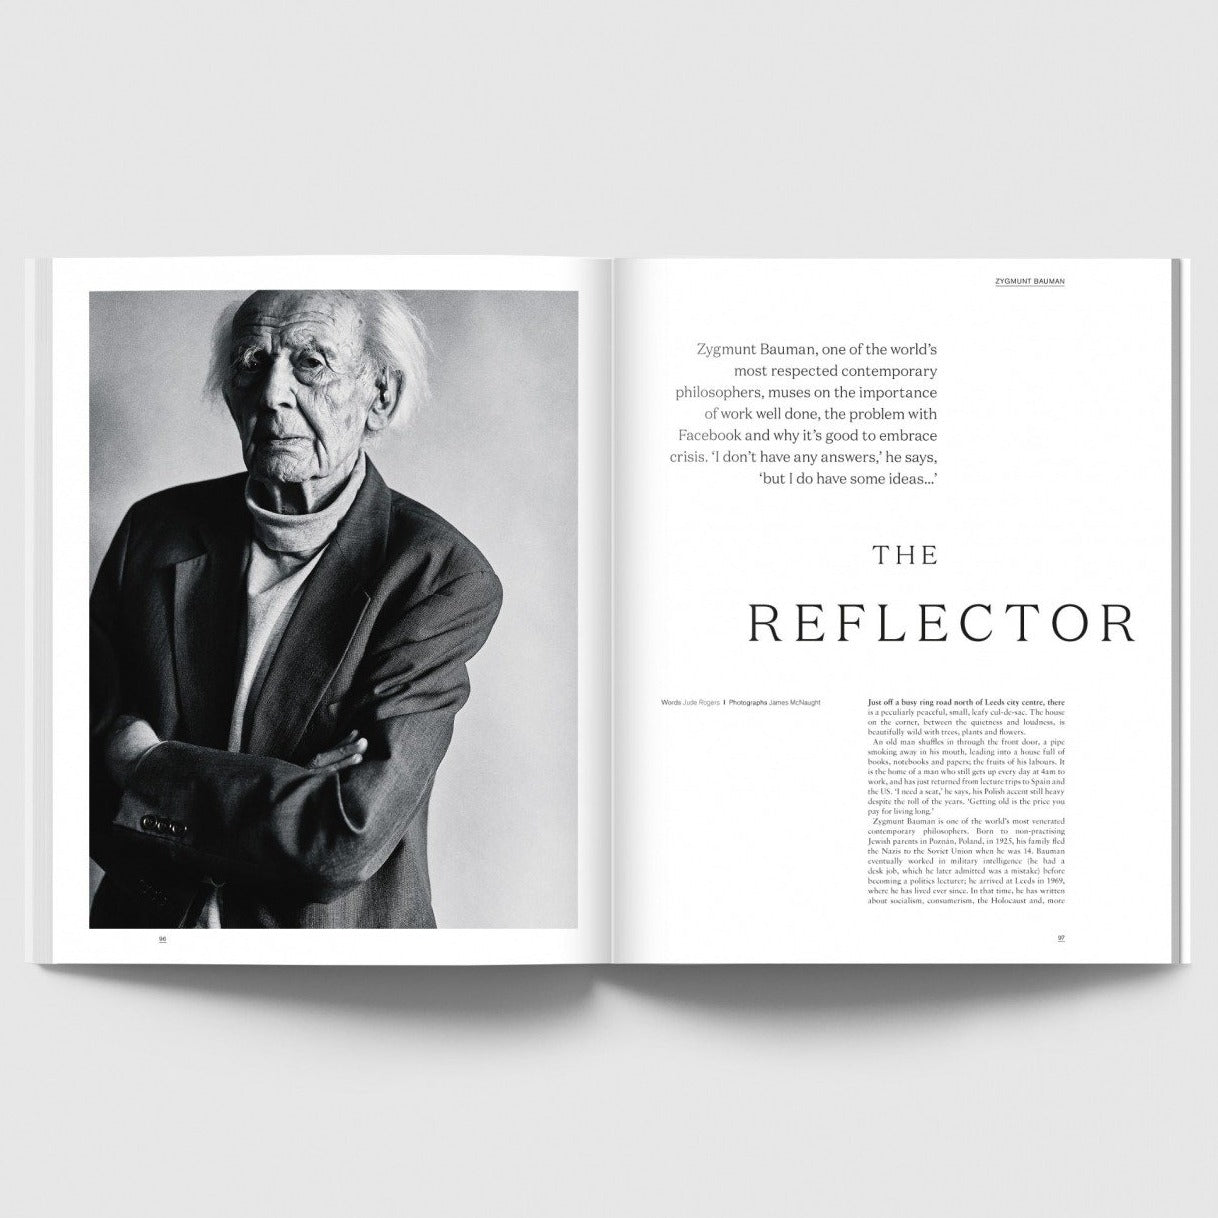 Issue 11: Reflection